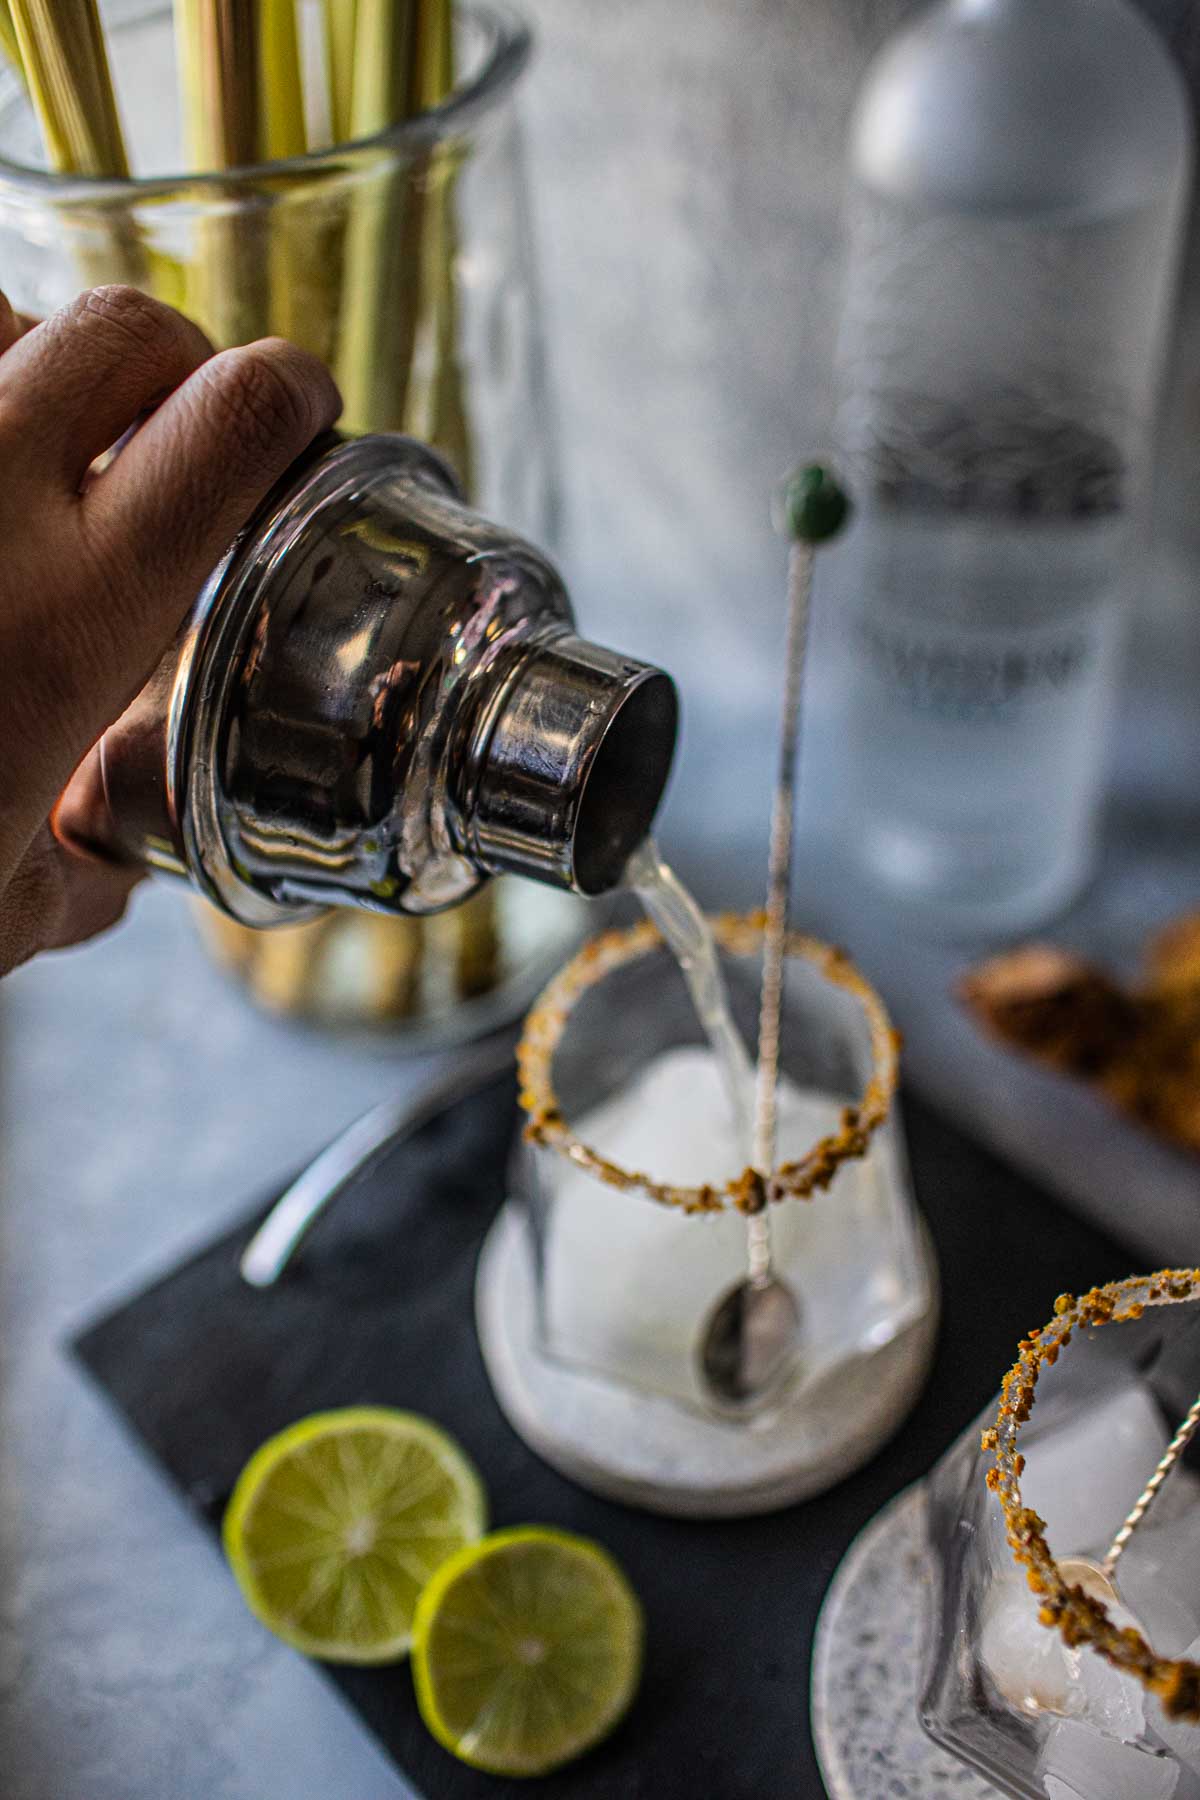 Pouring Tom Yum cocktail from a shaker.